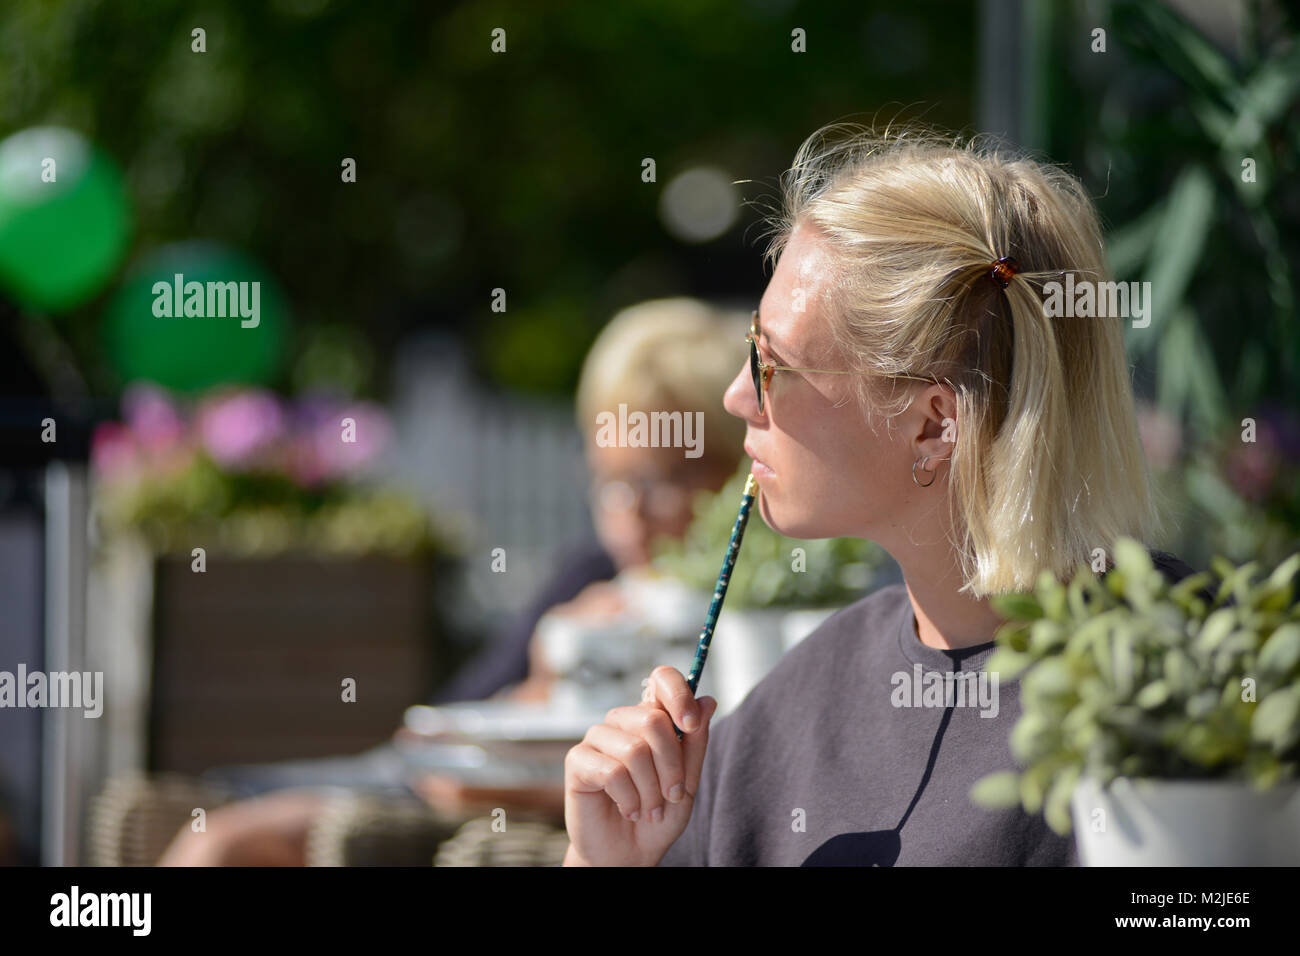 A blonde student reading a book while having a morning coffee. Oslo, Norway Stock Photo